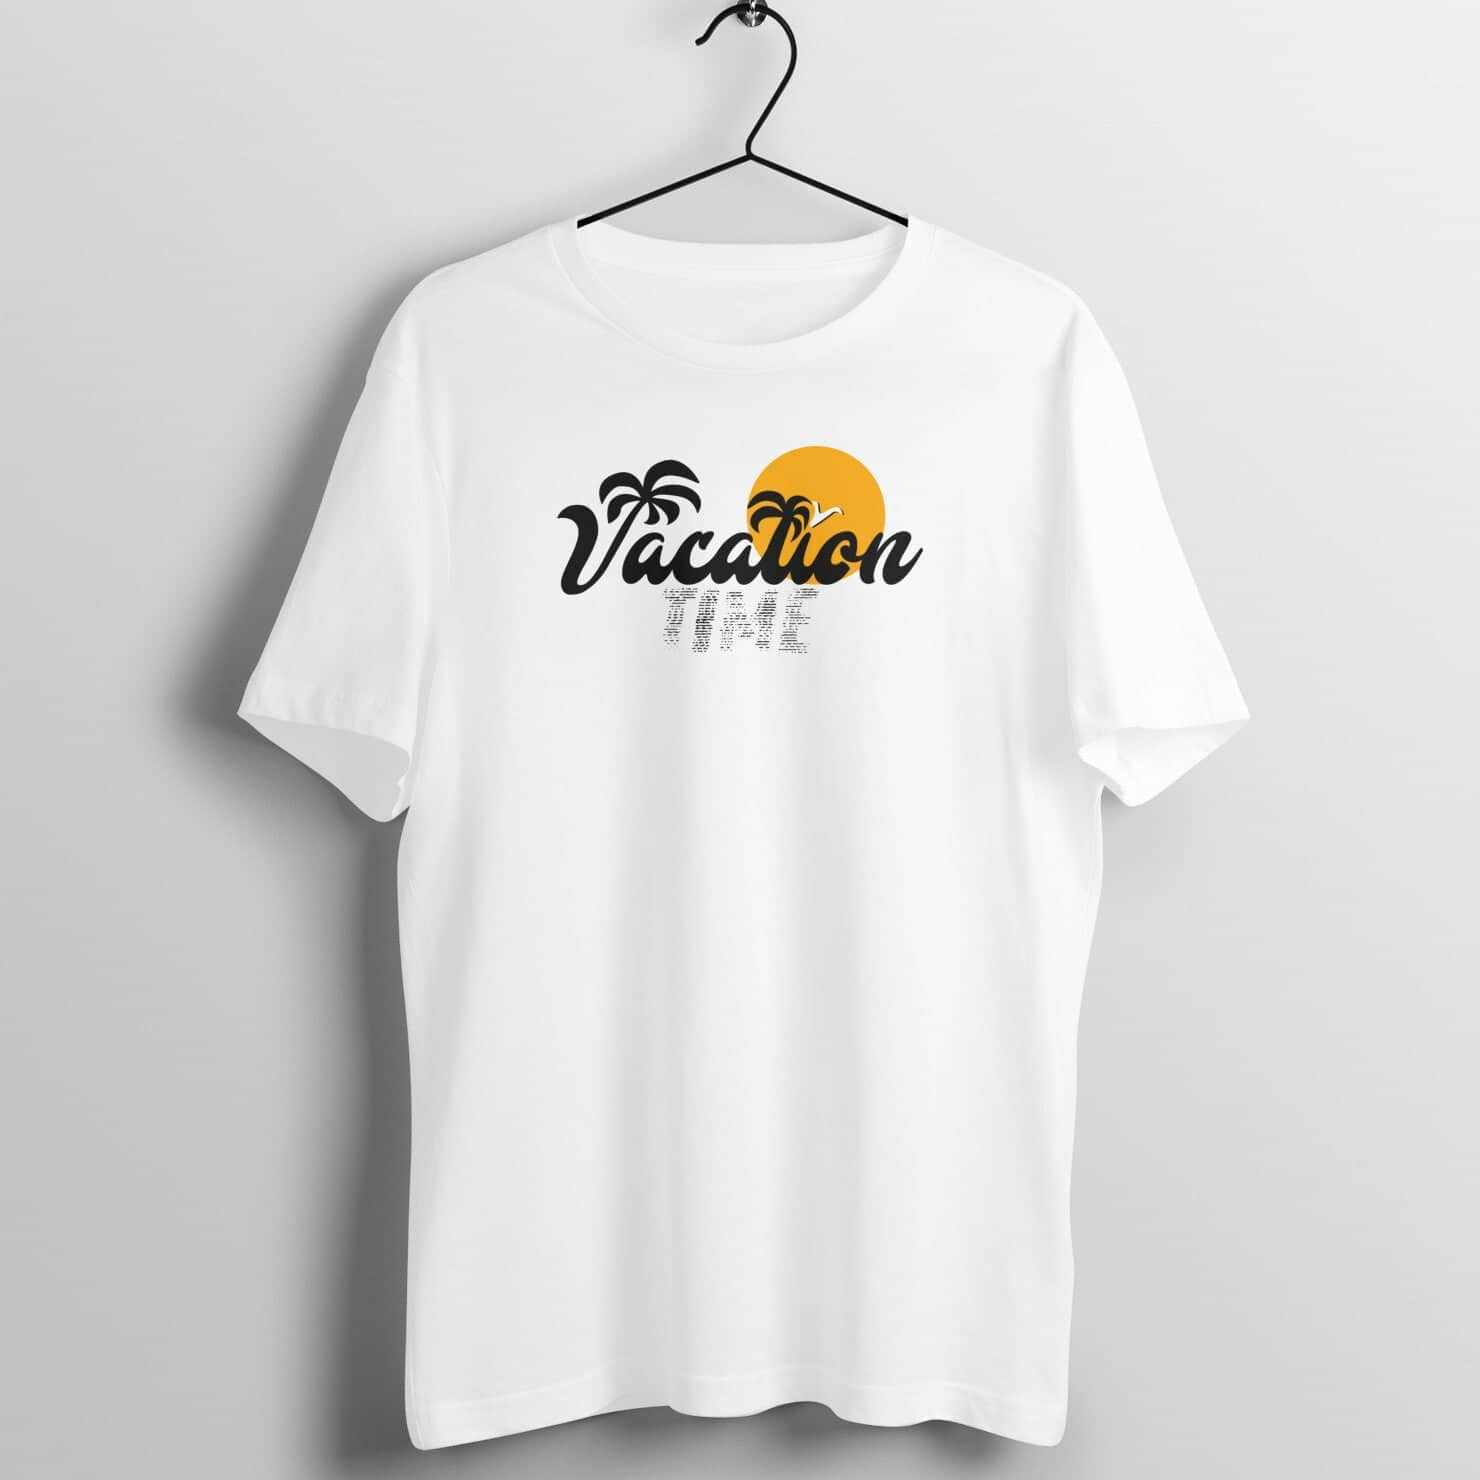 Vacation Time Exclusive White Holiday T Shirt for Men and Women Printrove White S 